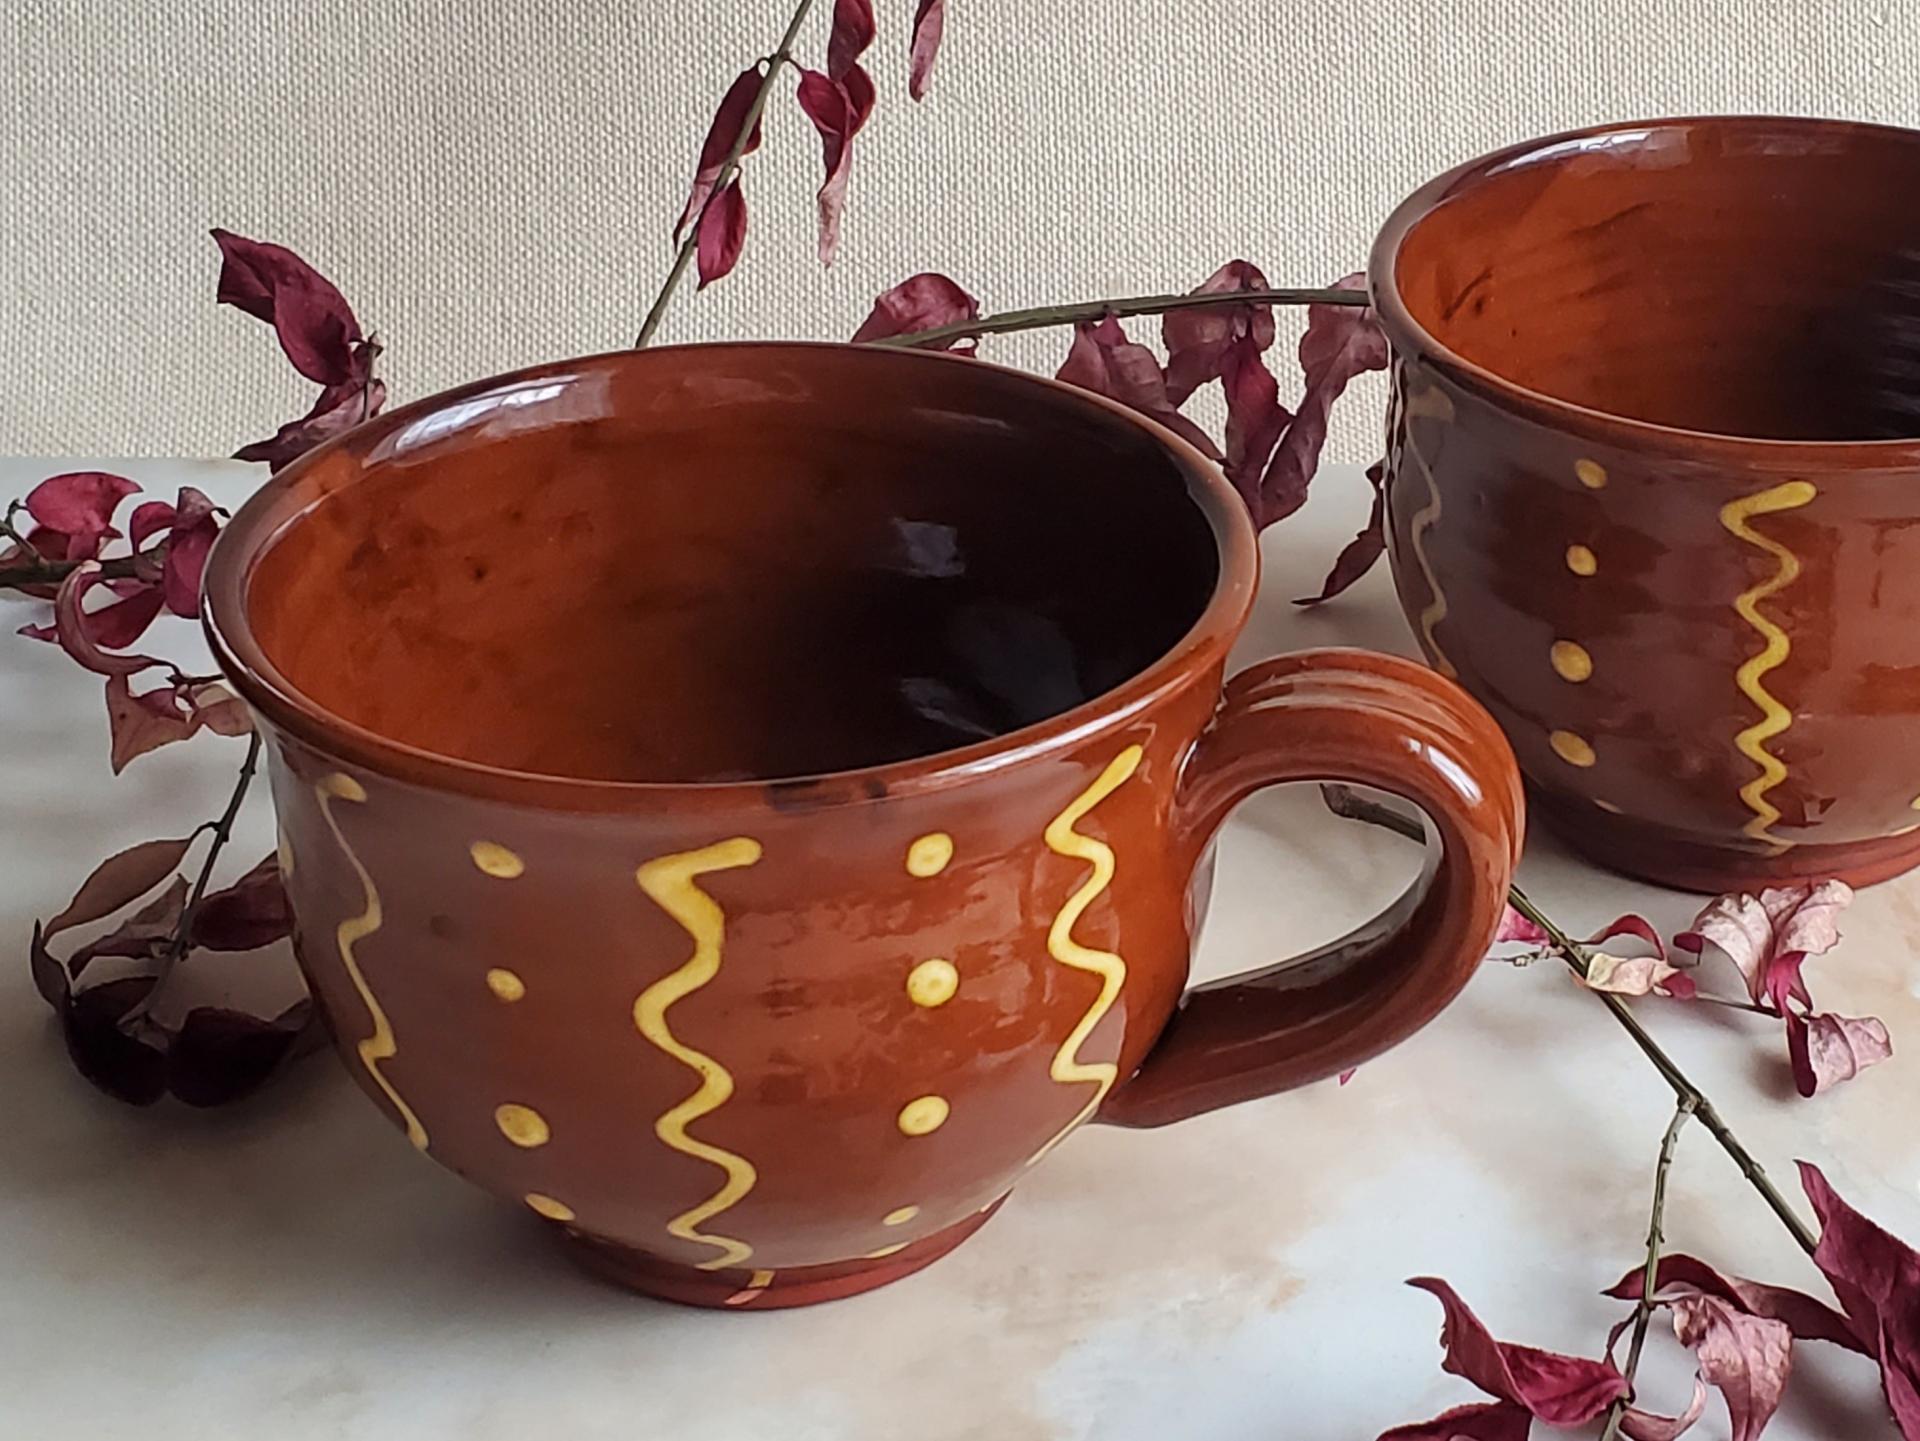 Redware Soup, Chowder, Cereal, Chili Bowls with Squiggles and Dots Decoration